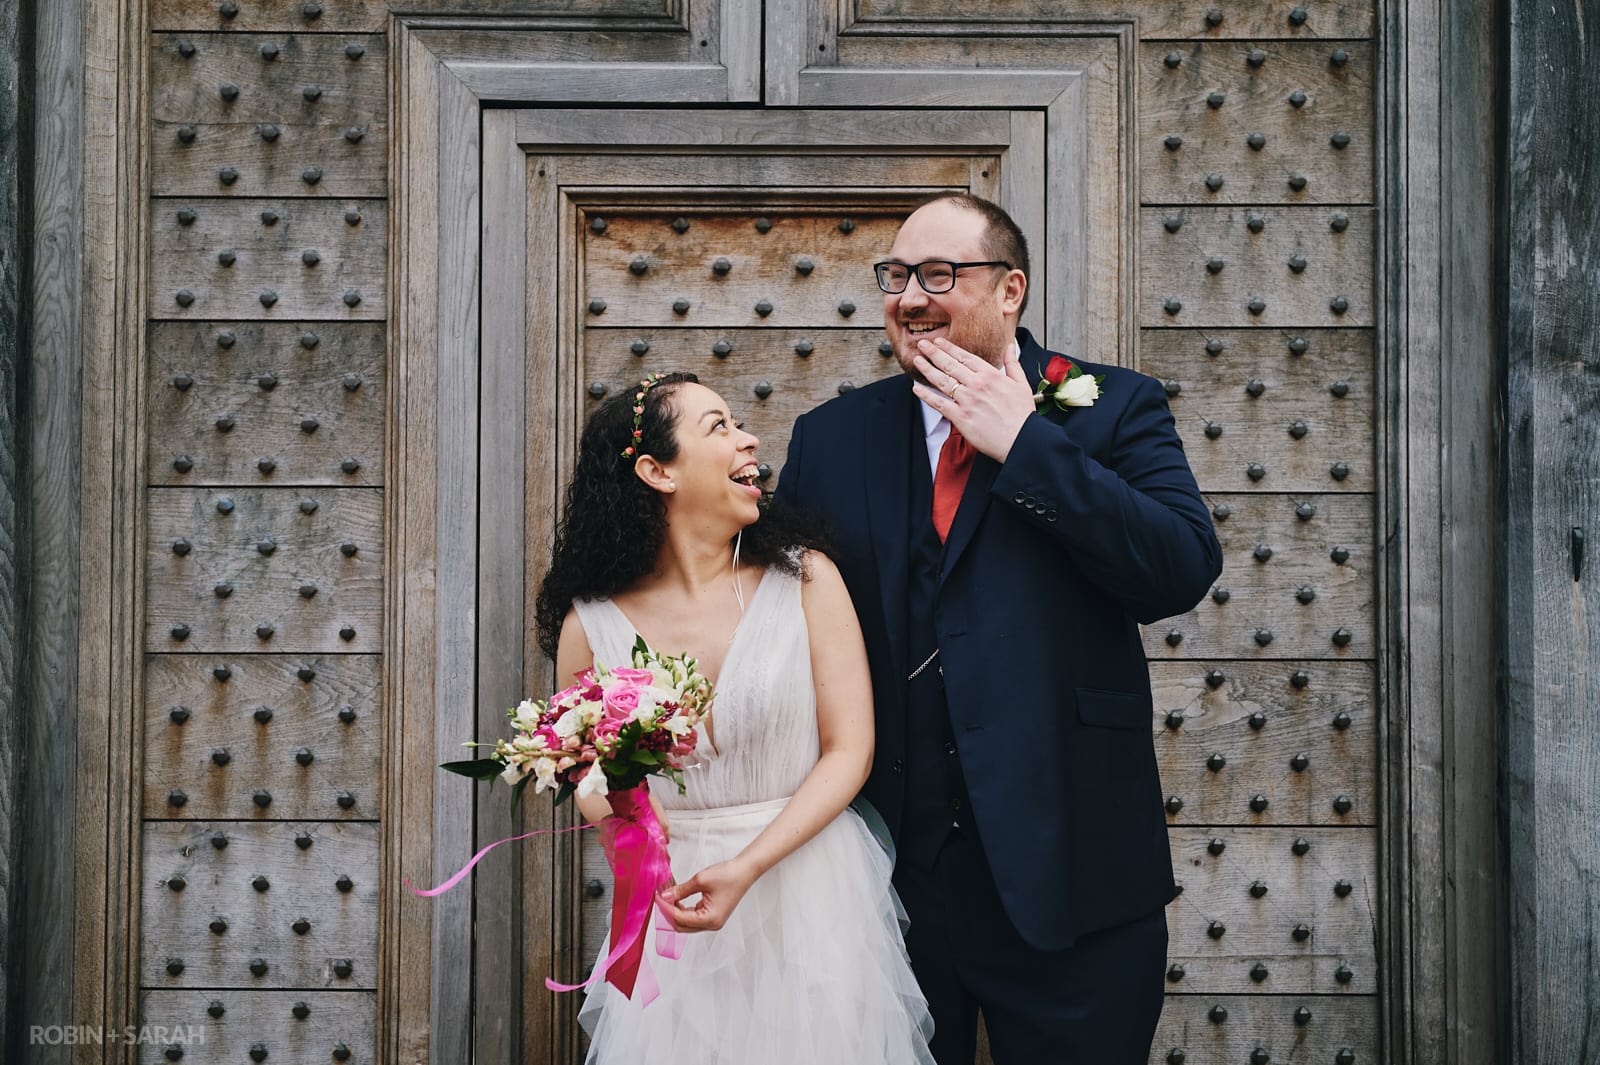 Bride and groom laughing together in front of old wooden doorway